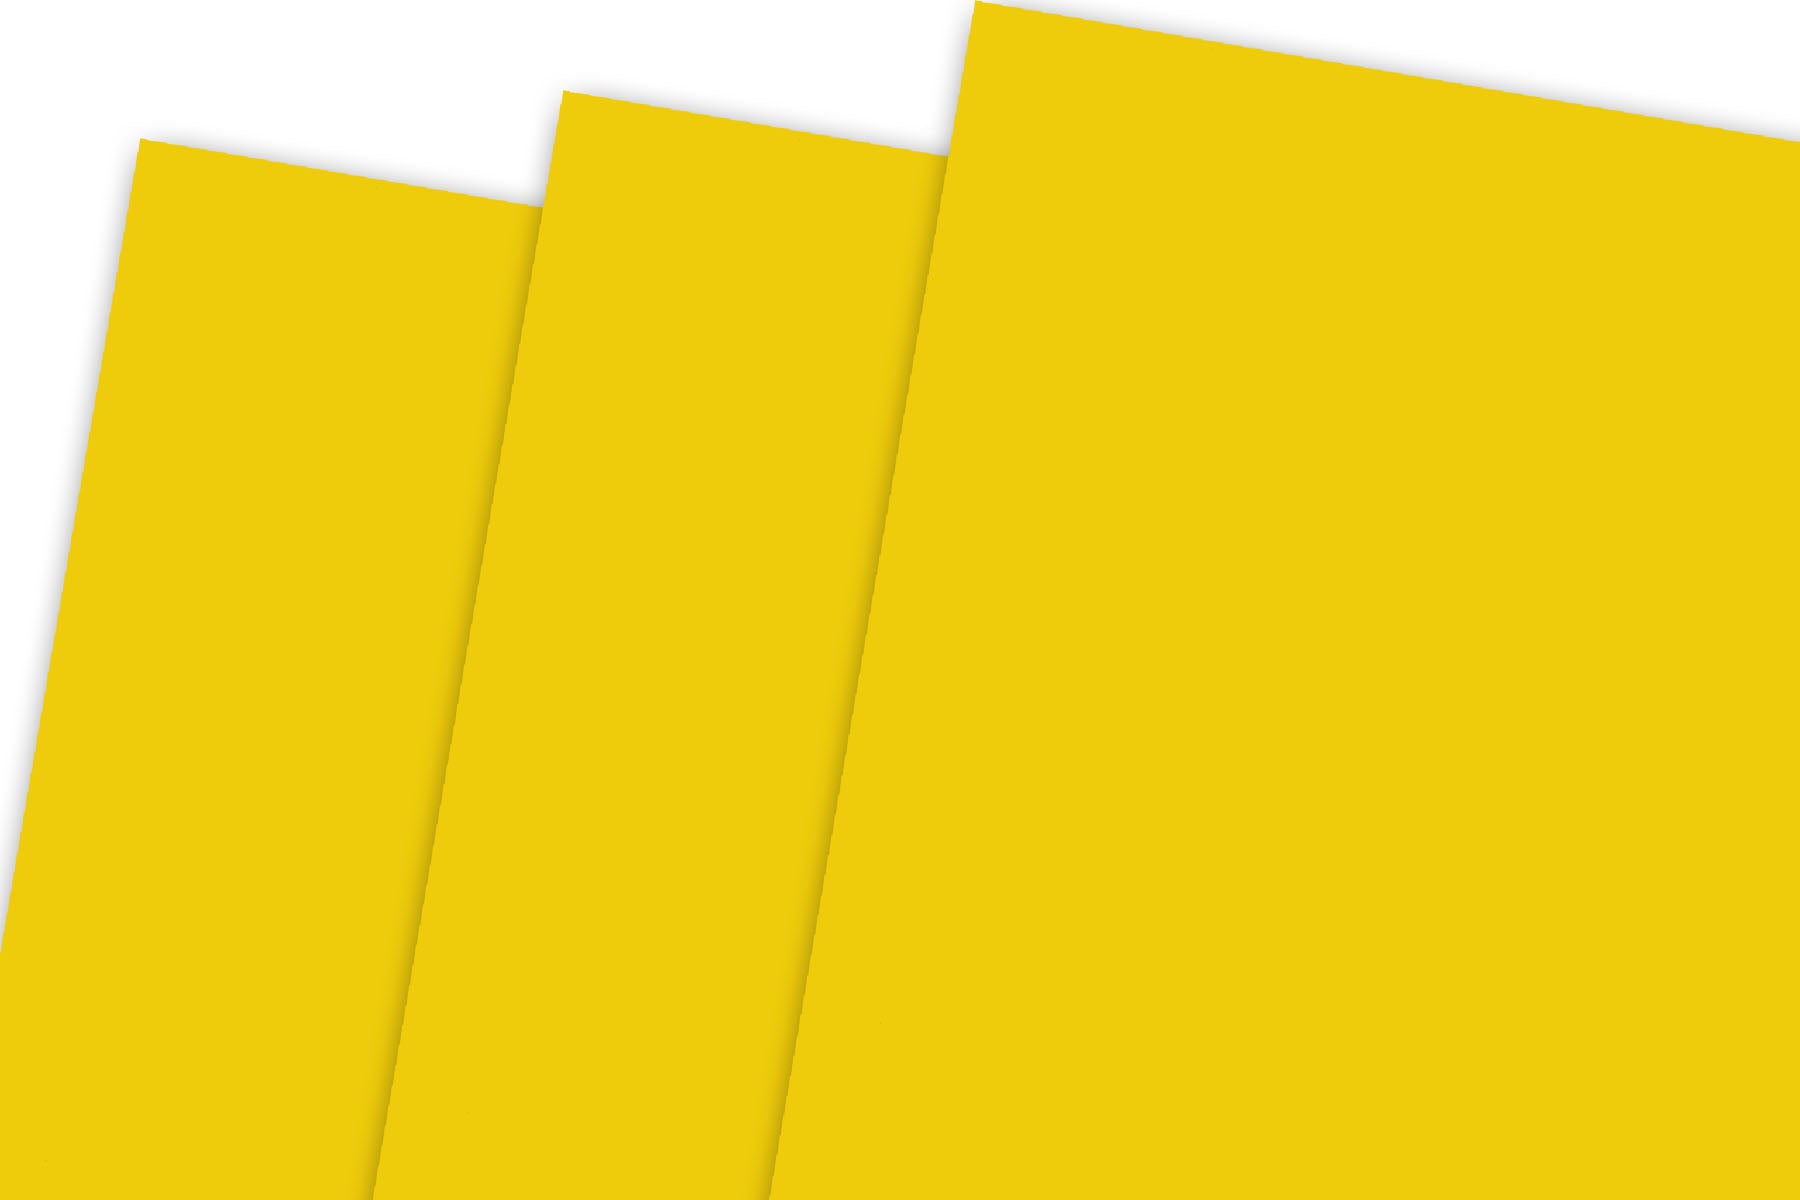 65lb Cover Cardstock Paper - 8.5 x 11 inch - 25 Sheets (Bright Yellow)